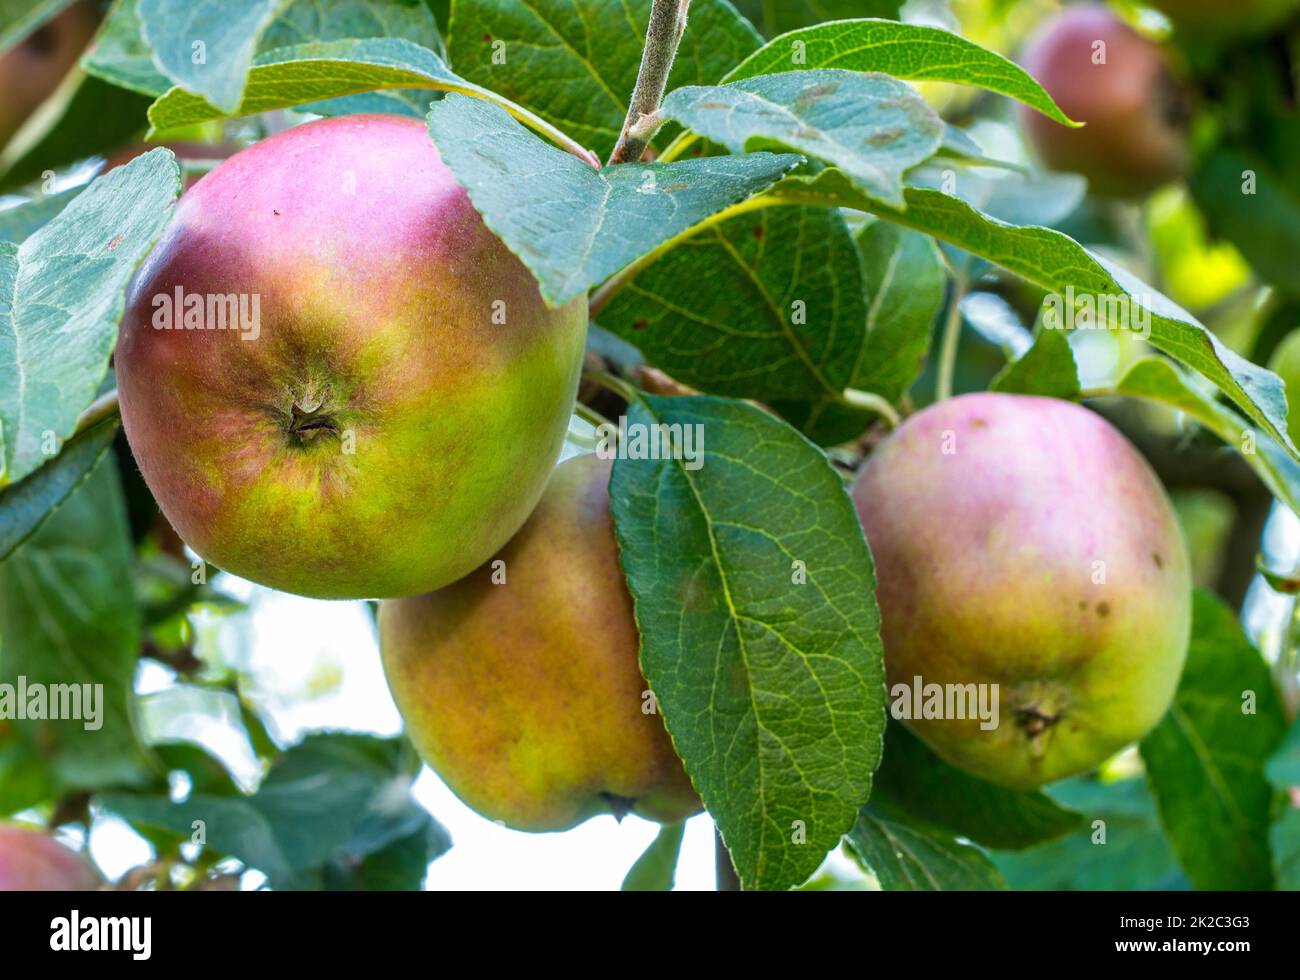 Apples. An apple a day keeps the doctor away. Stock Photo